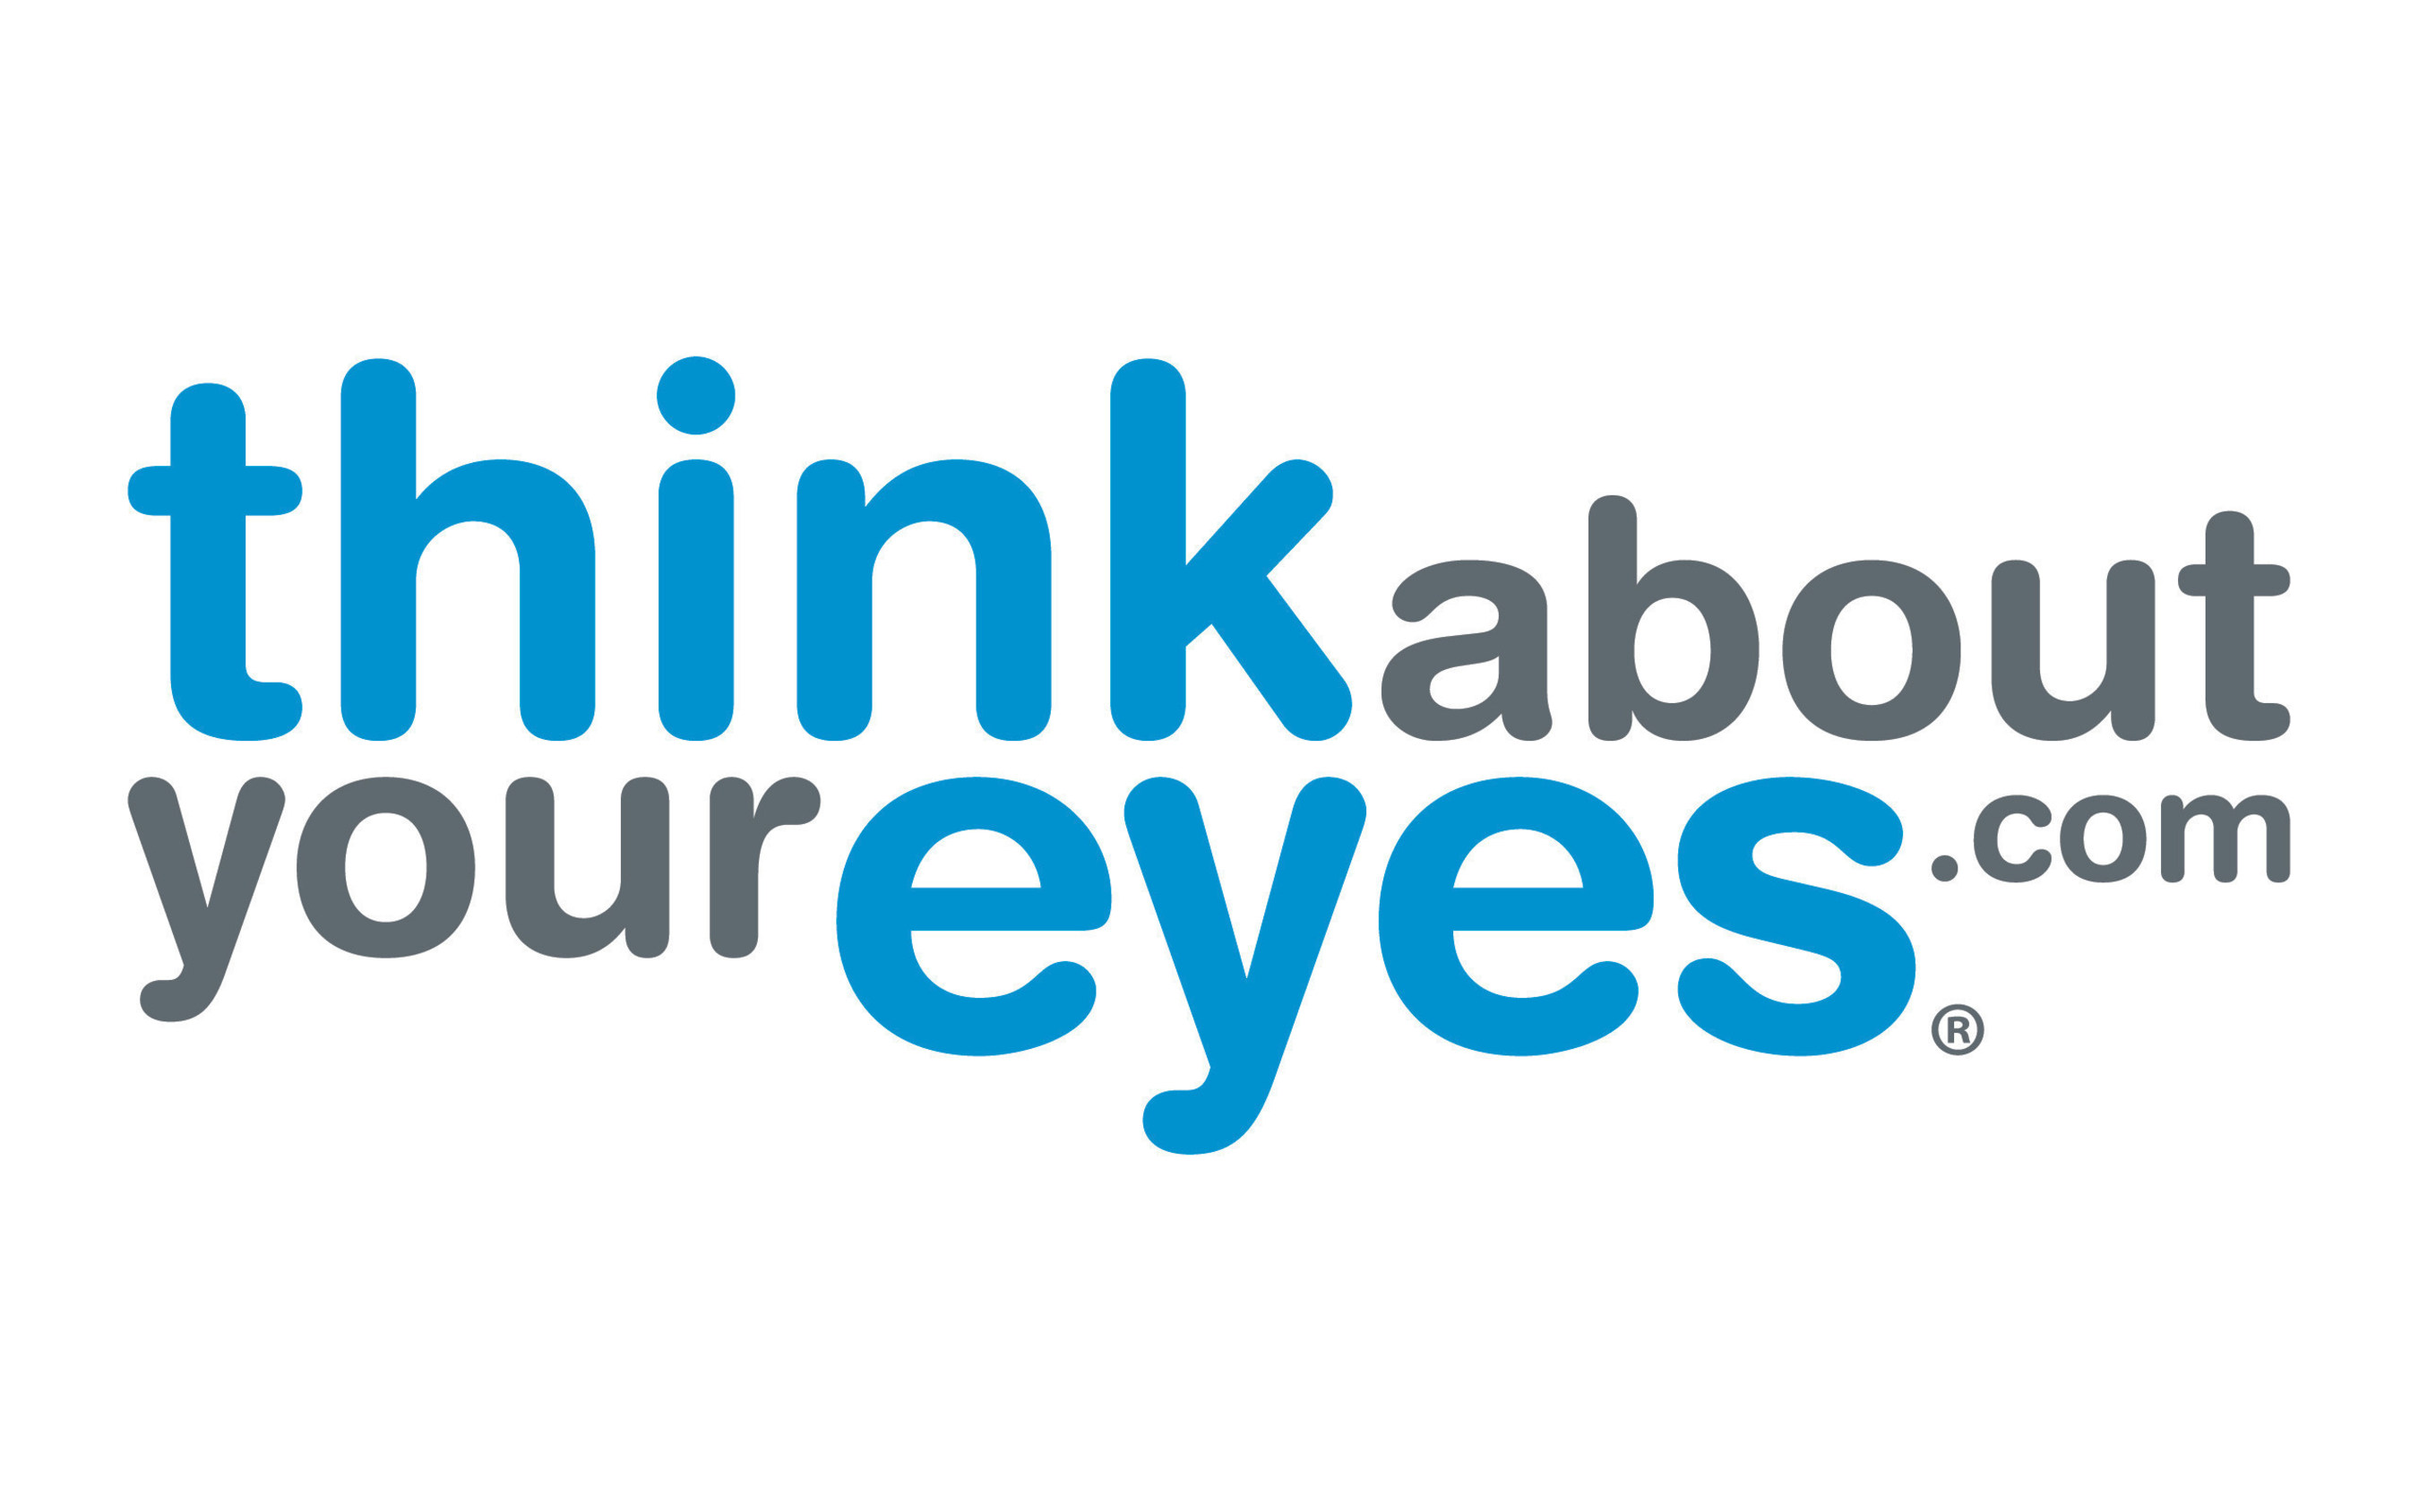 Think About Your Eyes, a national public awareness campaign to promote the importance of an annual comprehensive eye exam, aims to educate consumers of all ages on why exams are an important part of overall health and wellness.